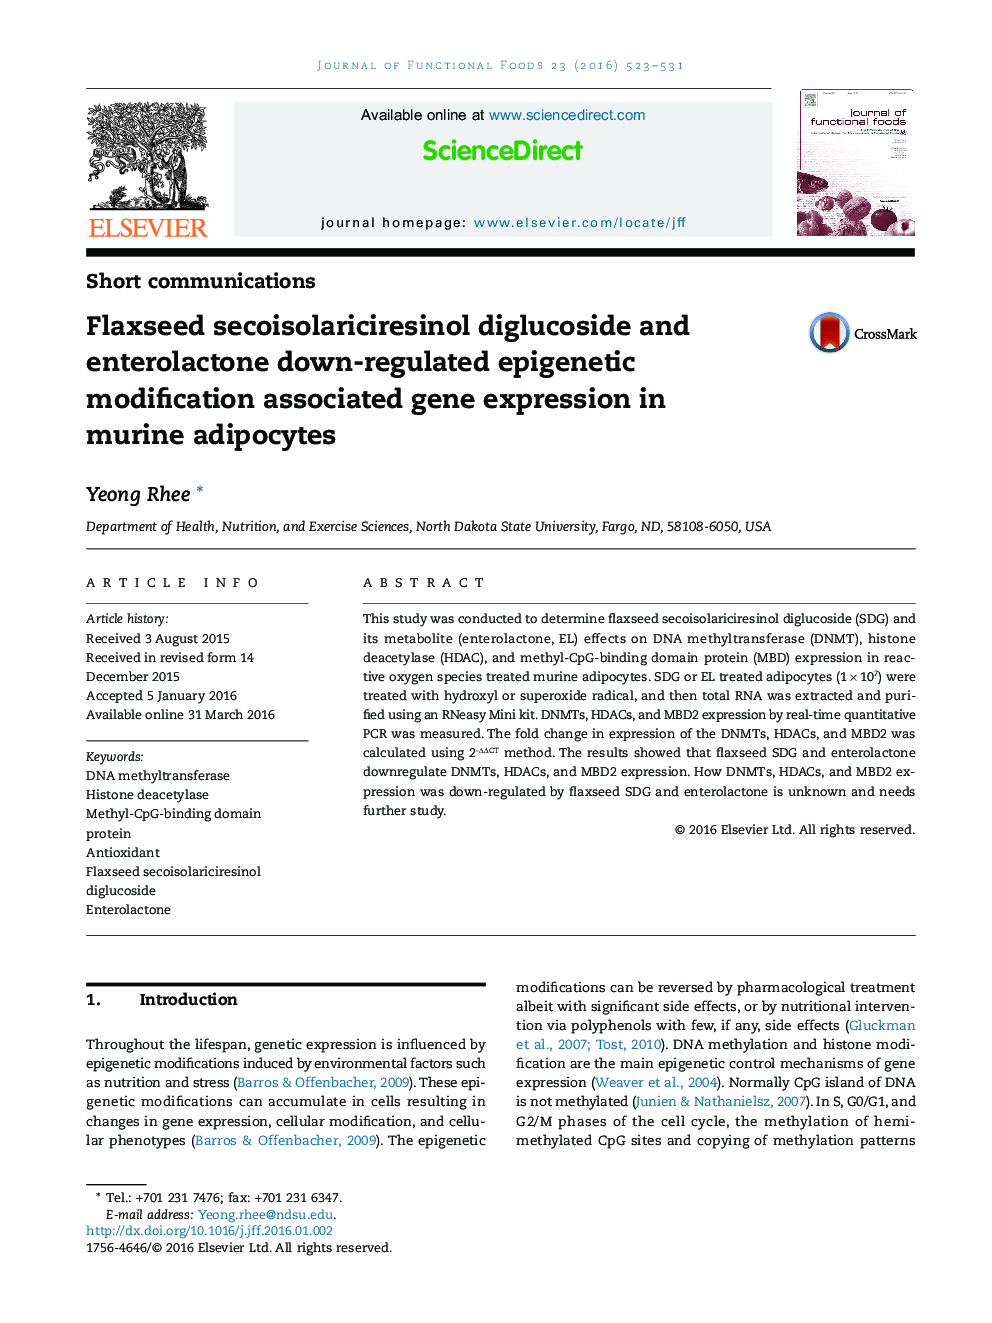 Flaxseed secoisolariciresinol diglucoside and enterolactone down-regulated epigenetic modification associated gene expression in murine adipocytes